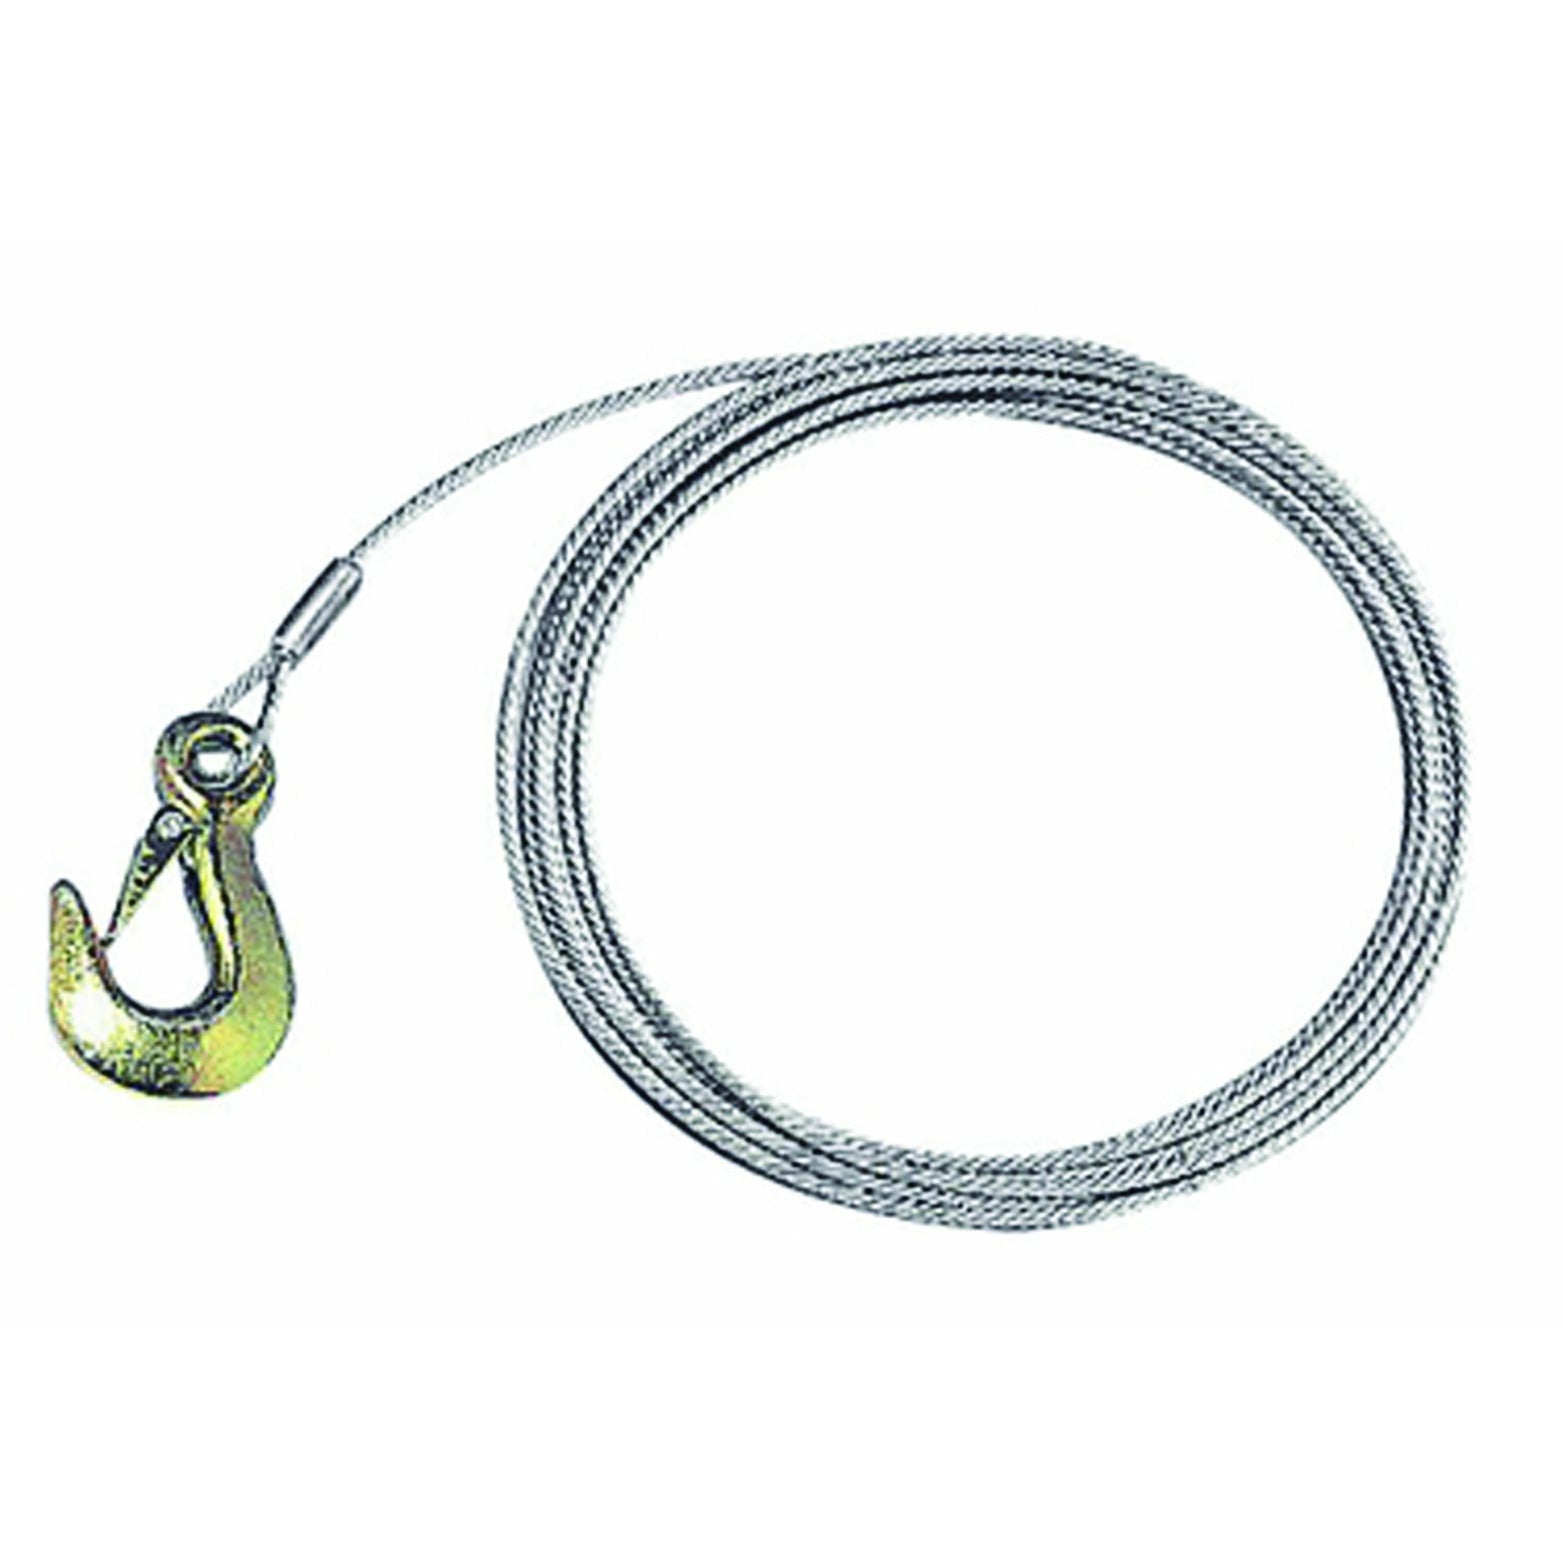 Talamex Winch Cable Wt-70C-12 M 76740112